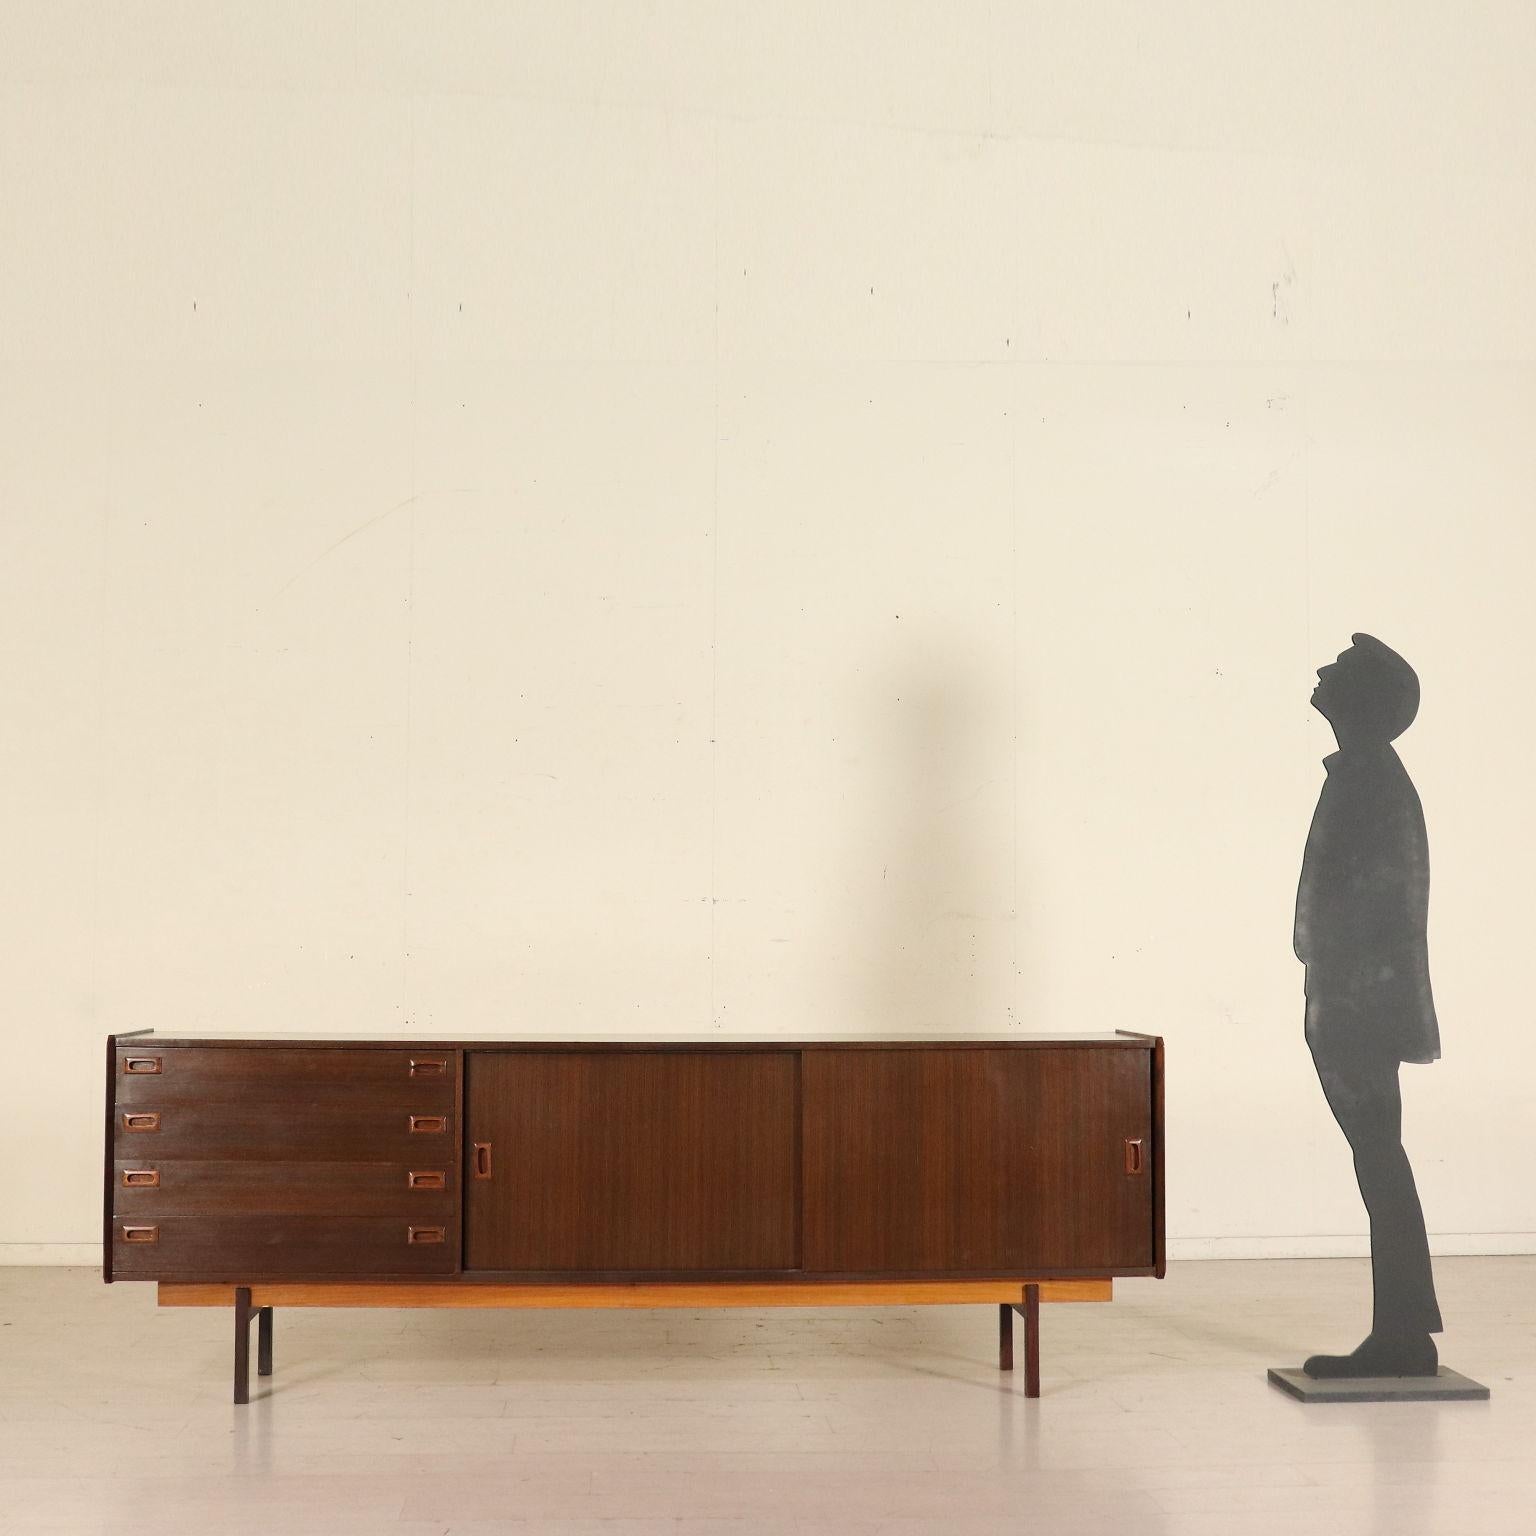 A sideboard with sliding doors and drawers; wood veneer. Manufactured in Italy, 1960s.